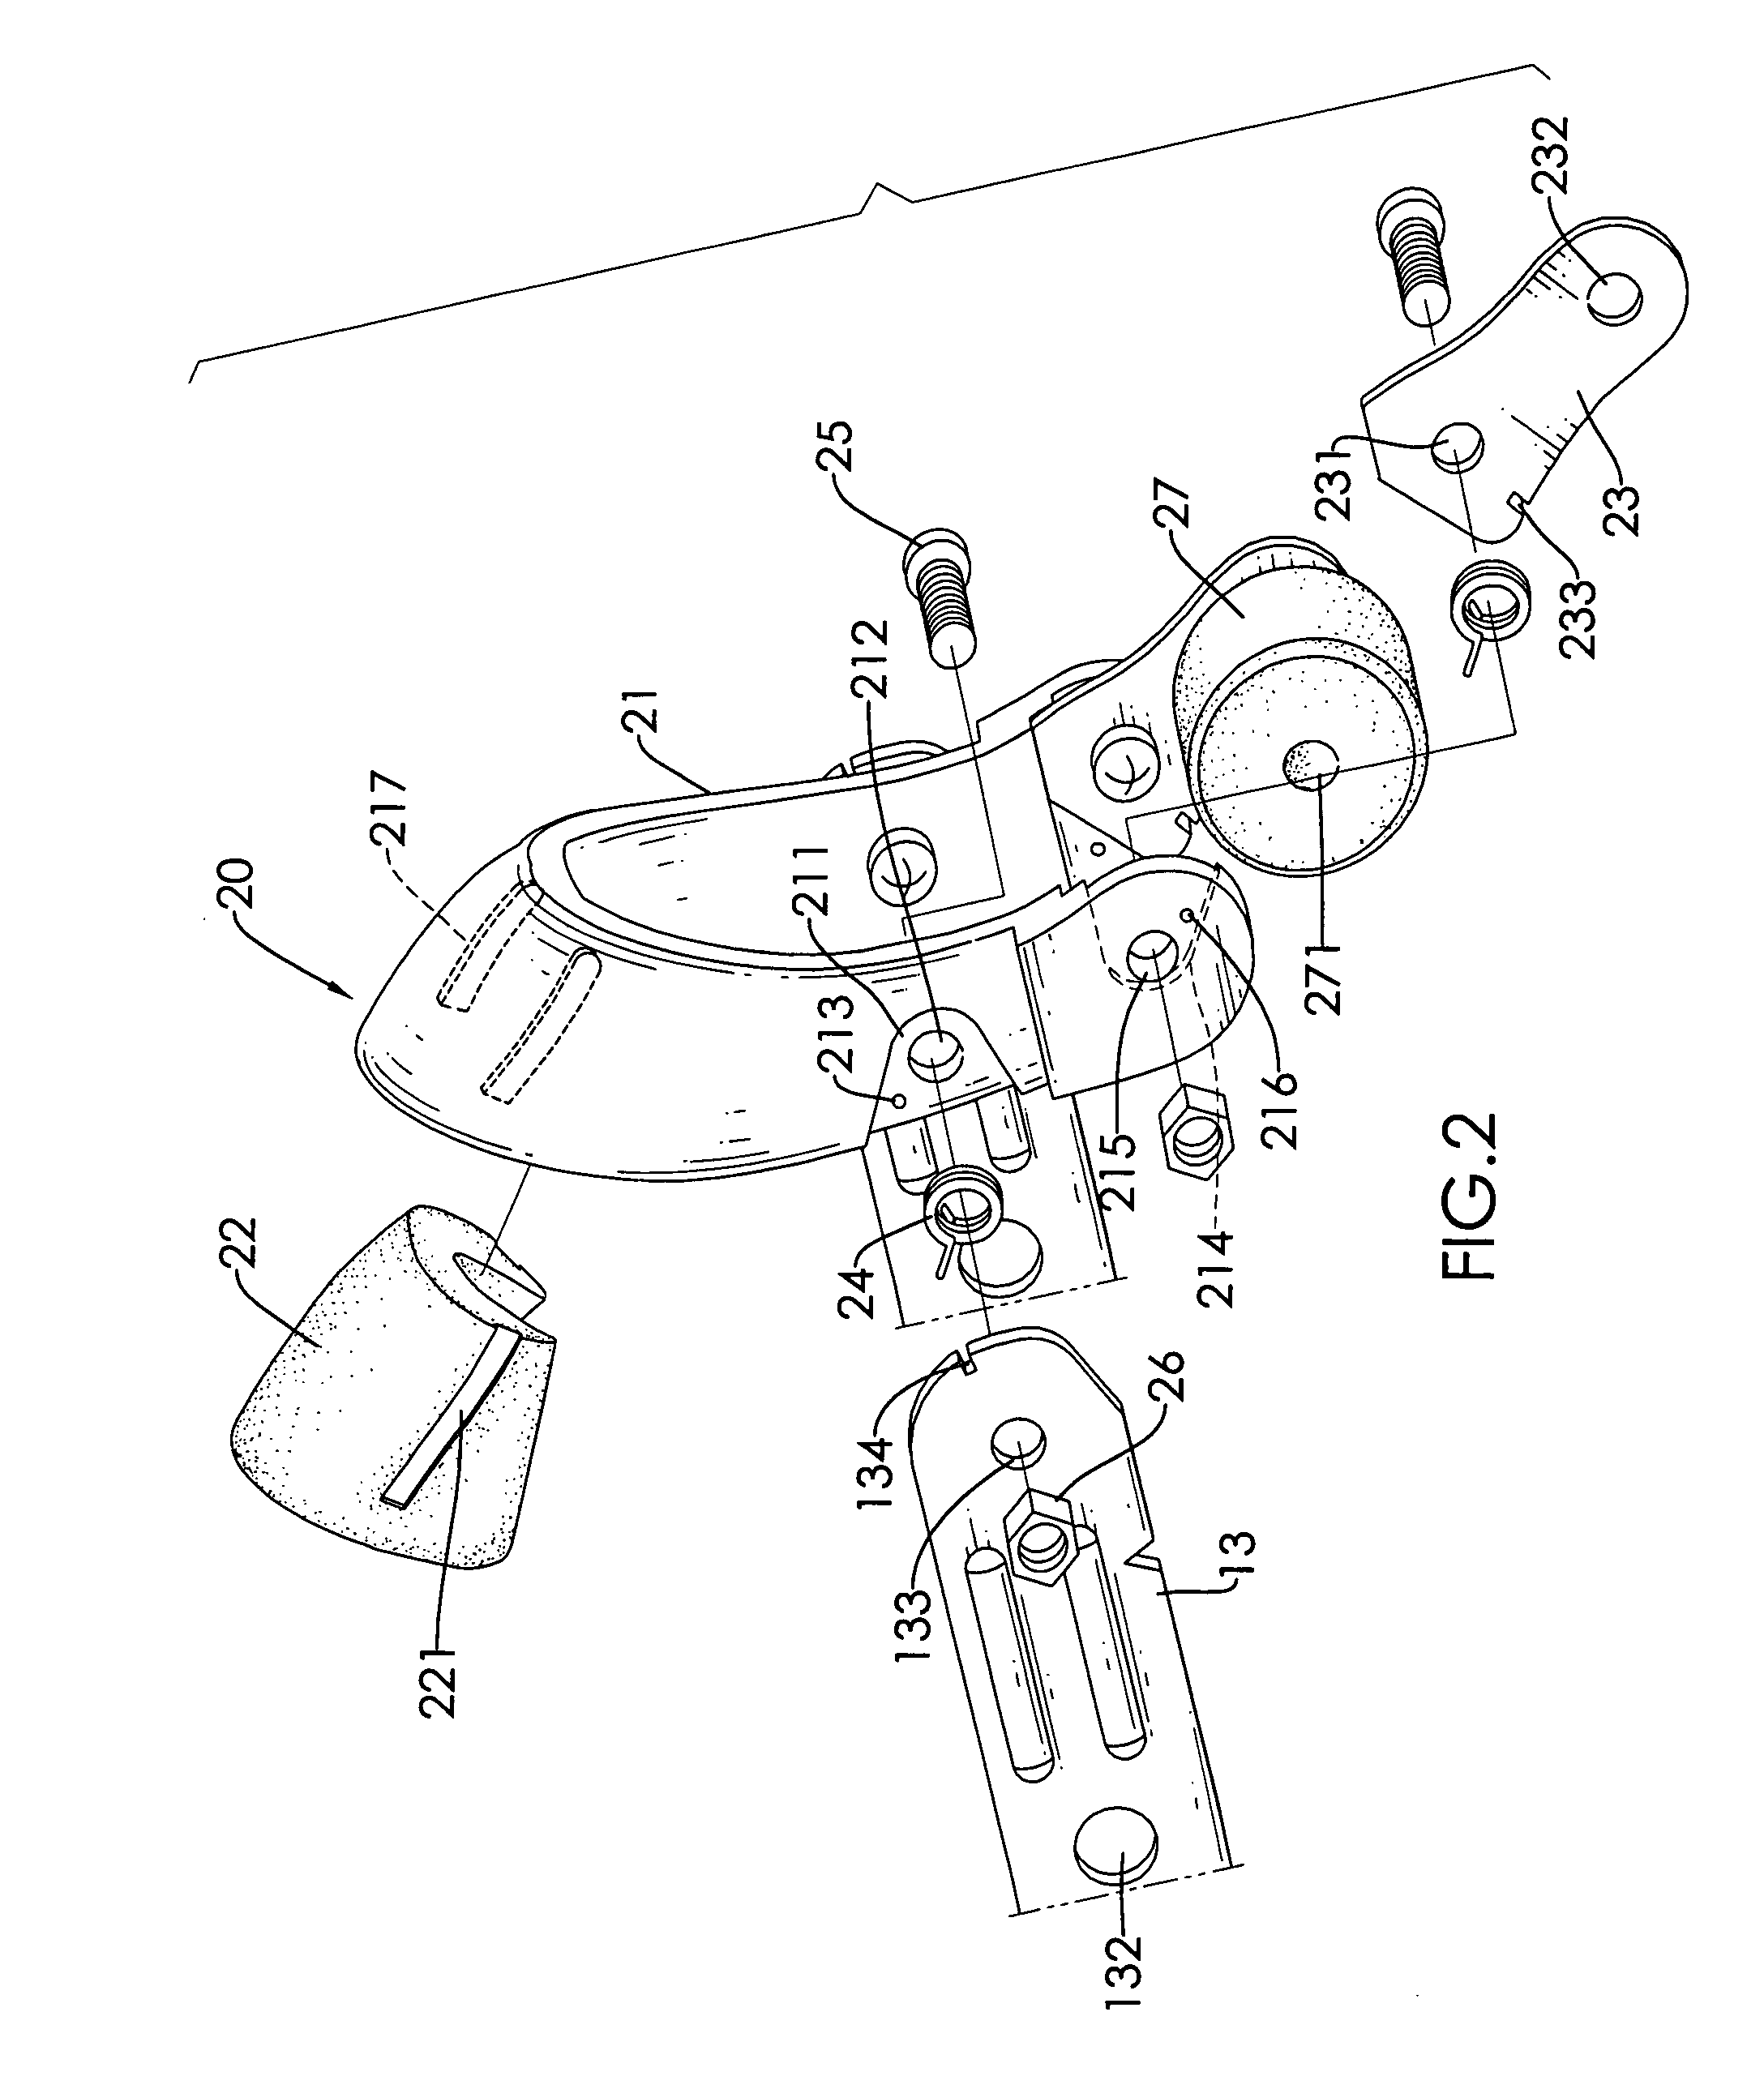 Inline skate with a braking system